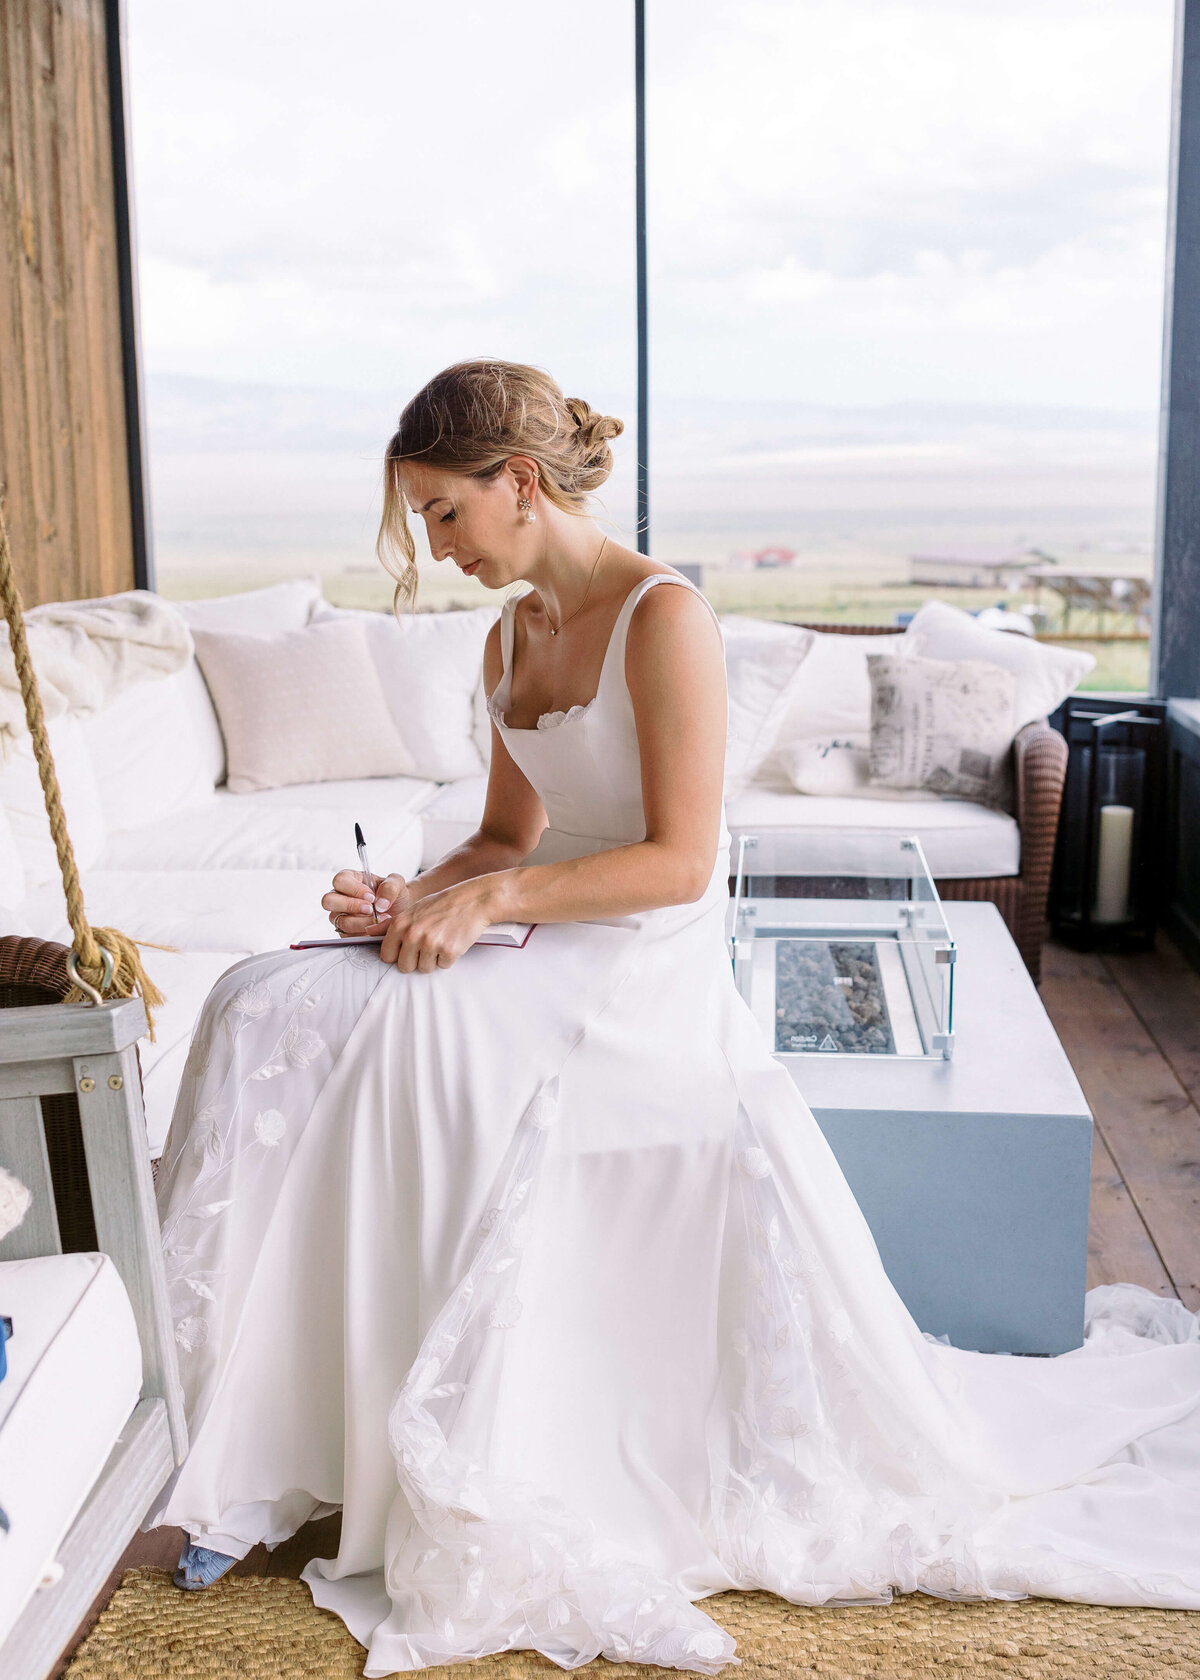 The bride sits on the porch of a cabin while she finishes writing down her vows